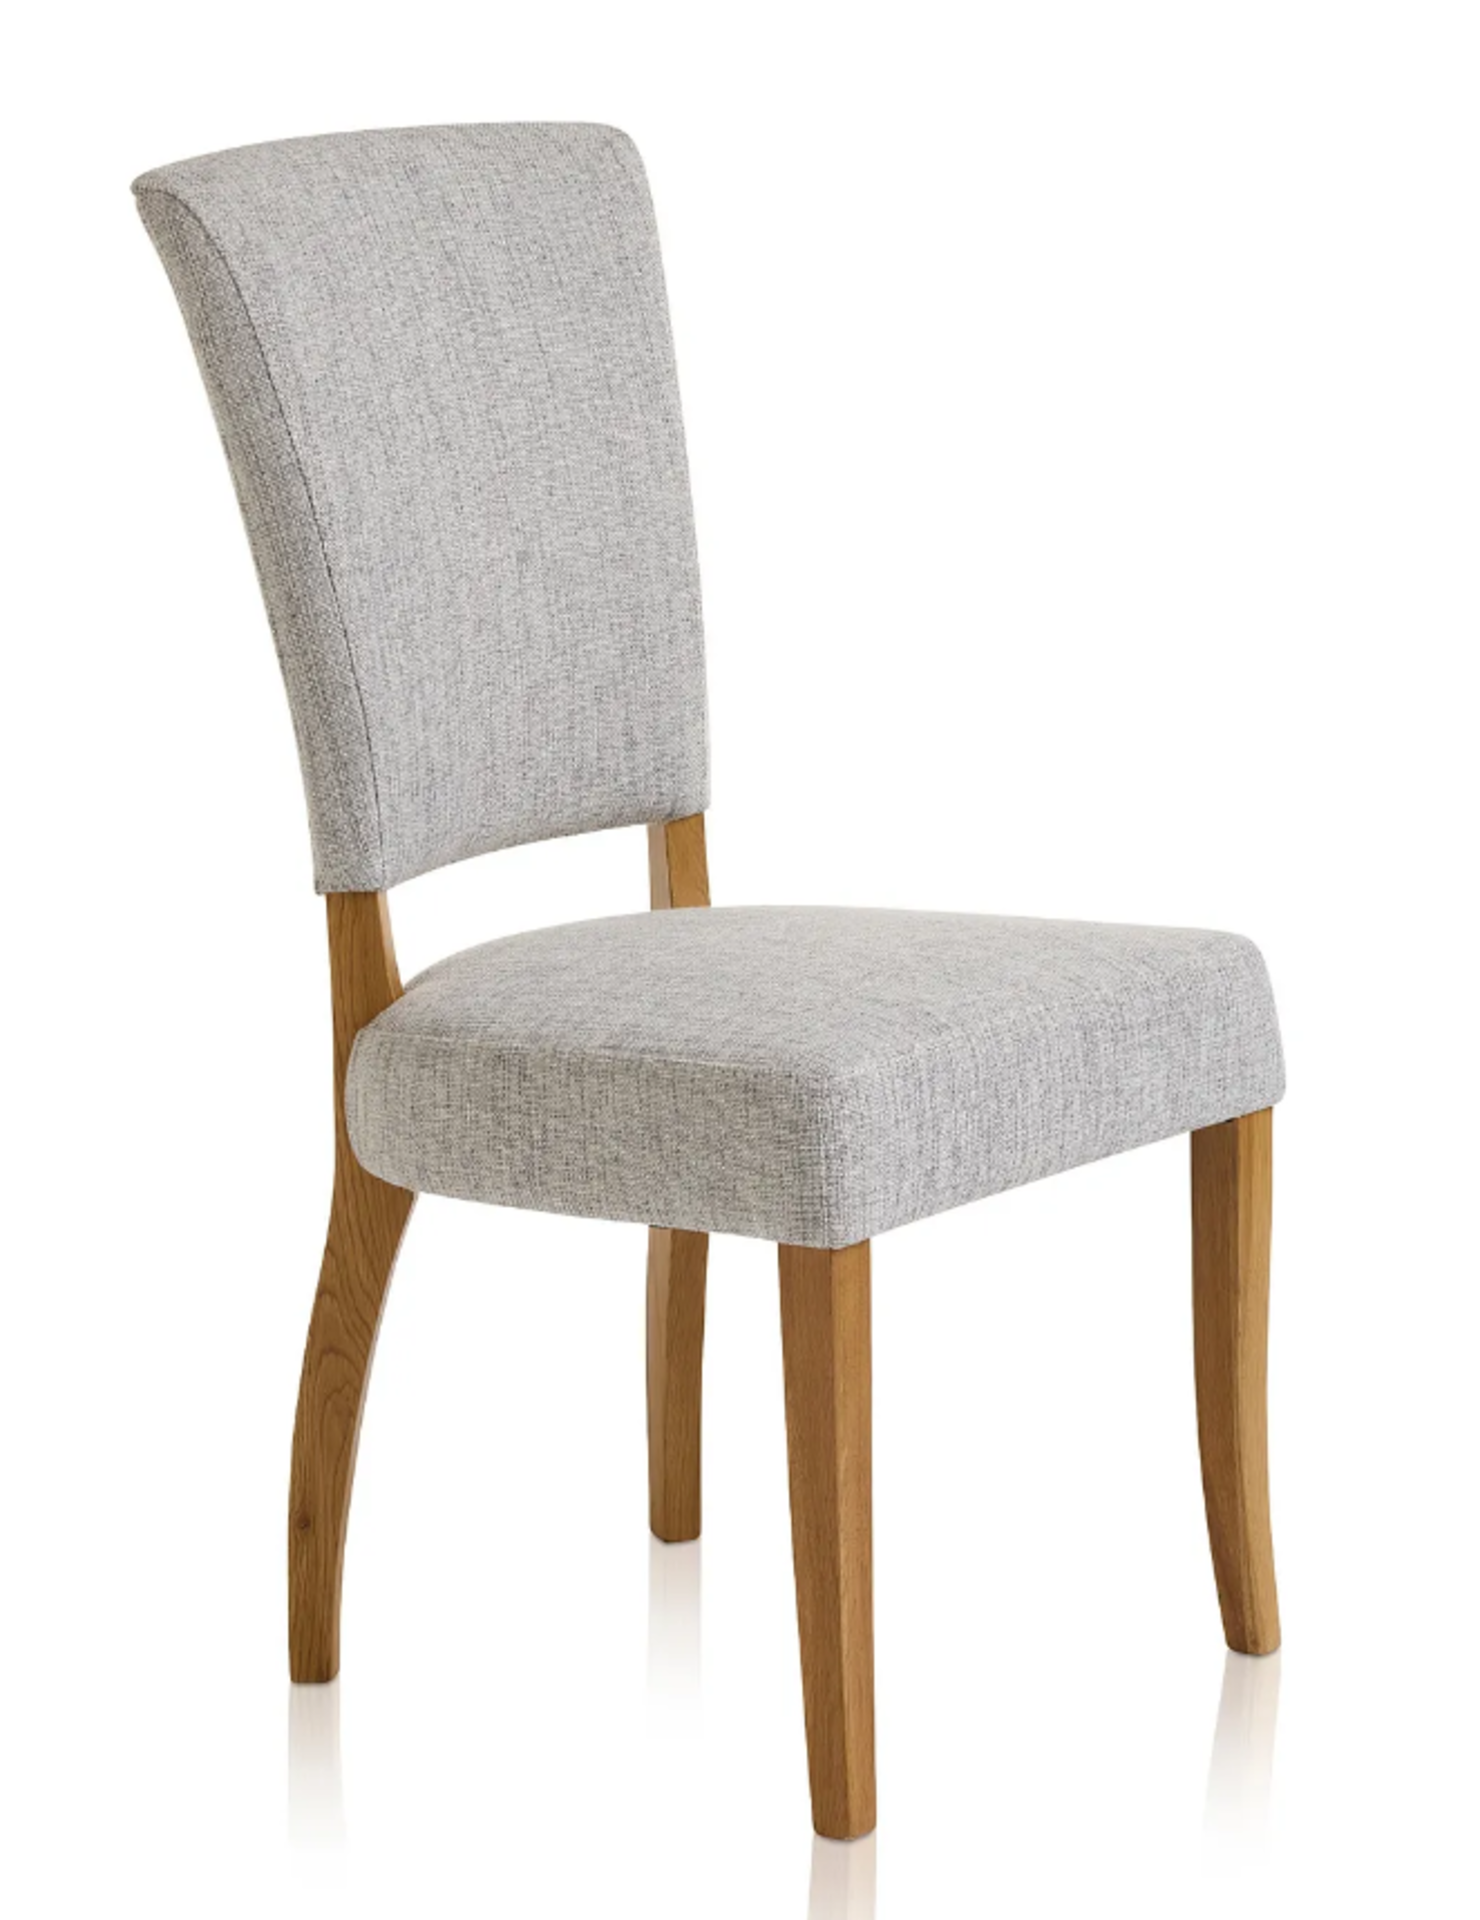 2 x CURVE BACK NATURAL/RUSTIC Plain Grey Fabric Dining Chair. . RRP £225.00. This dining chair boast